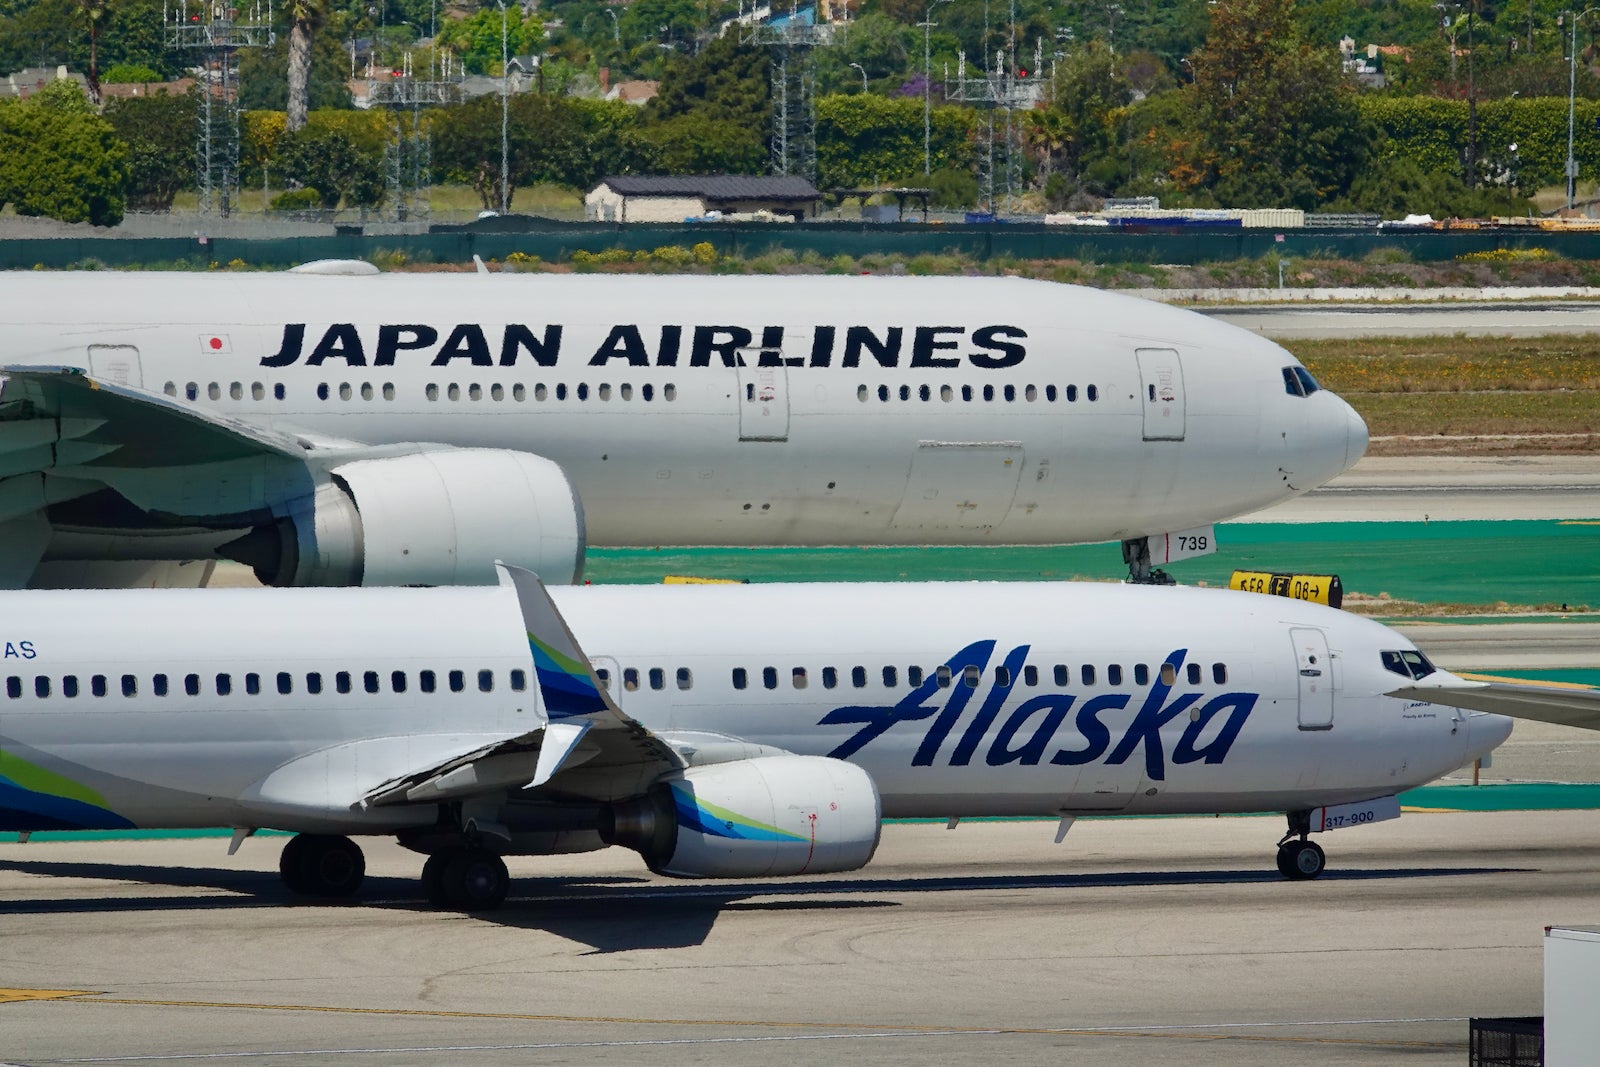 Japan Airlines and Alaska planes